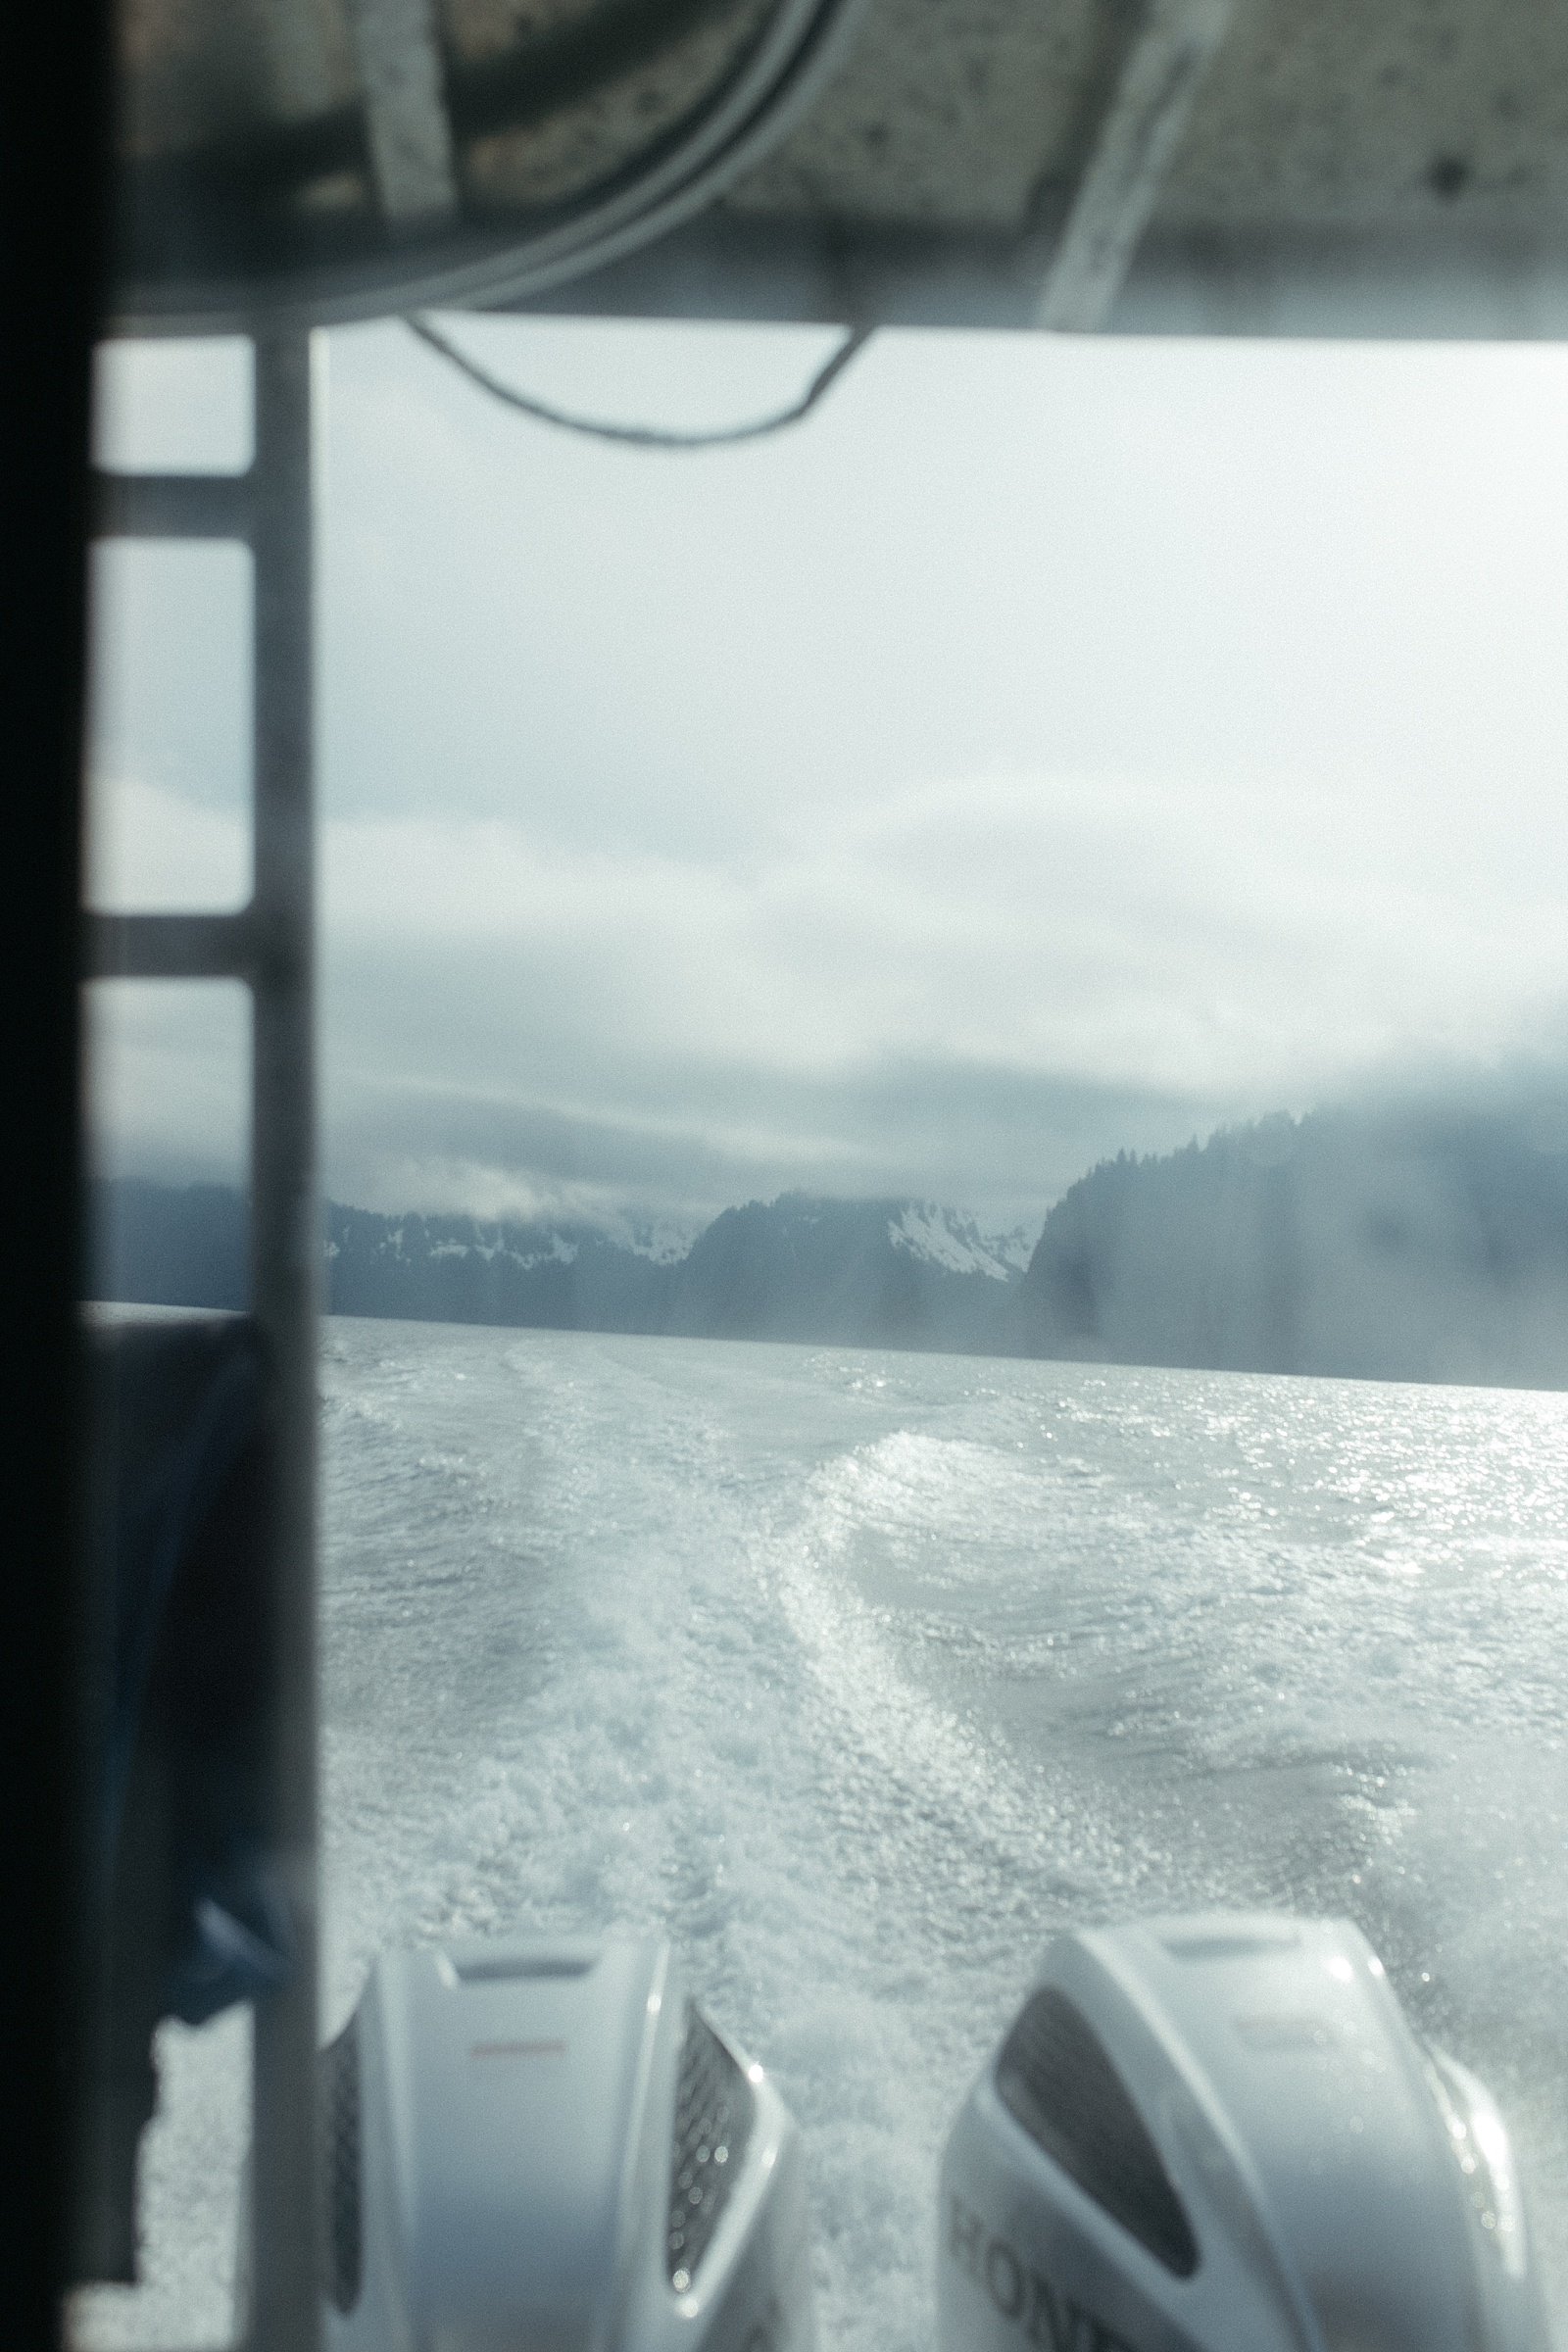  Water behind the boat on the way to a wedding ceremony by an Alaska wedding photographer 